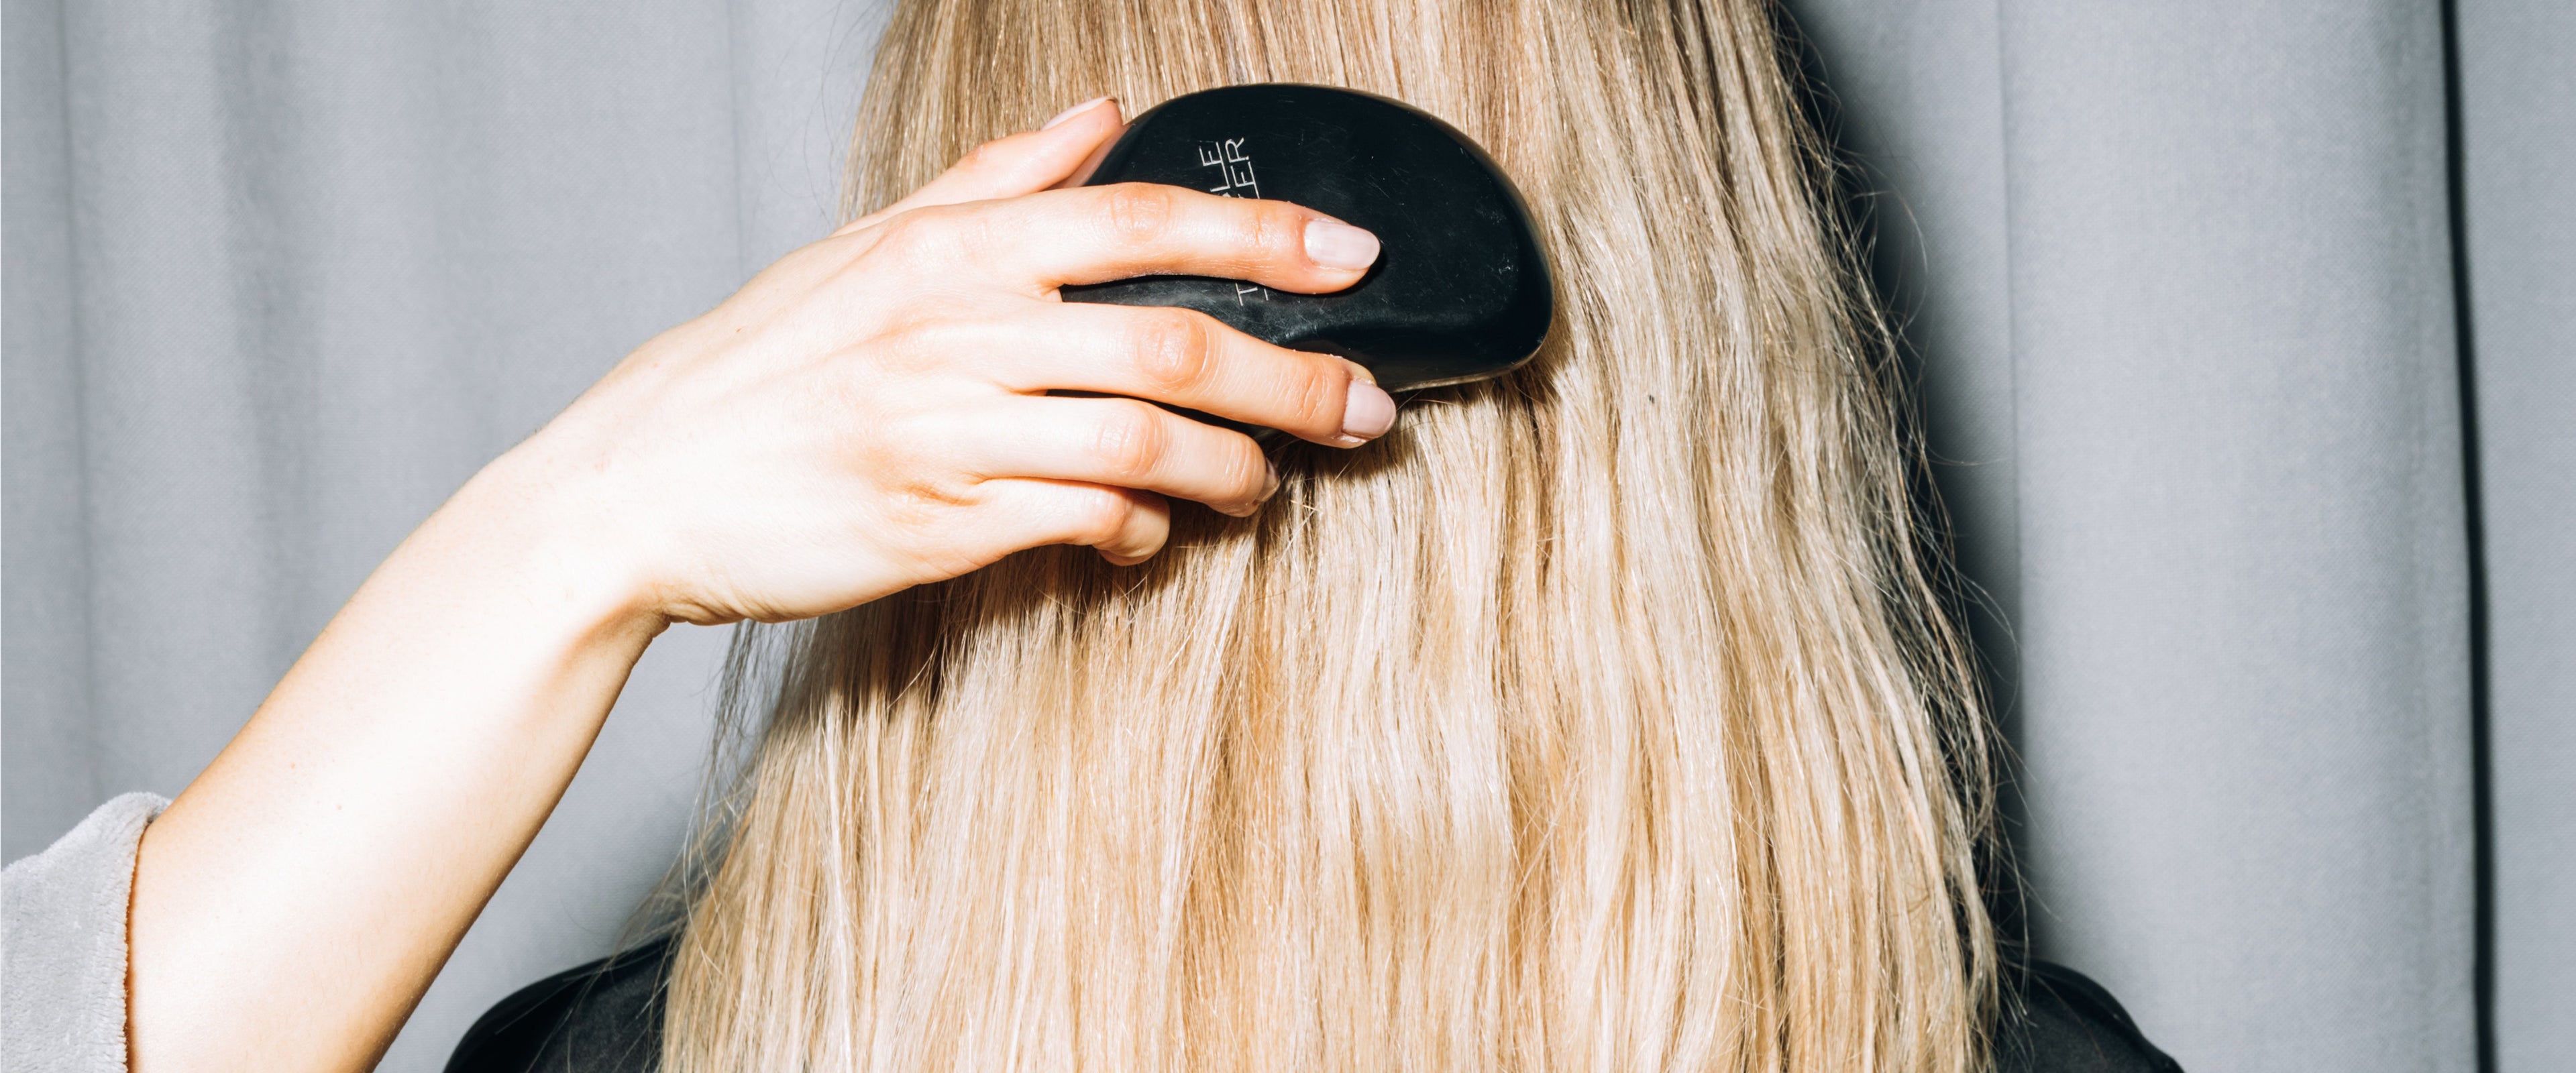 How to Get Rid of Frizzy Hair 11 Essential Tips  FYI